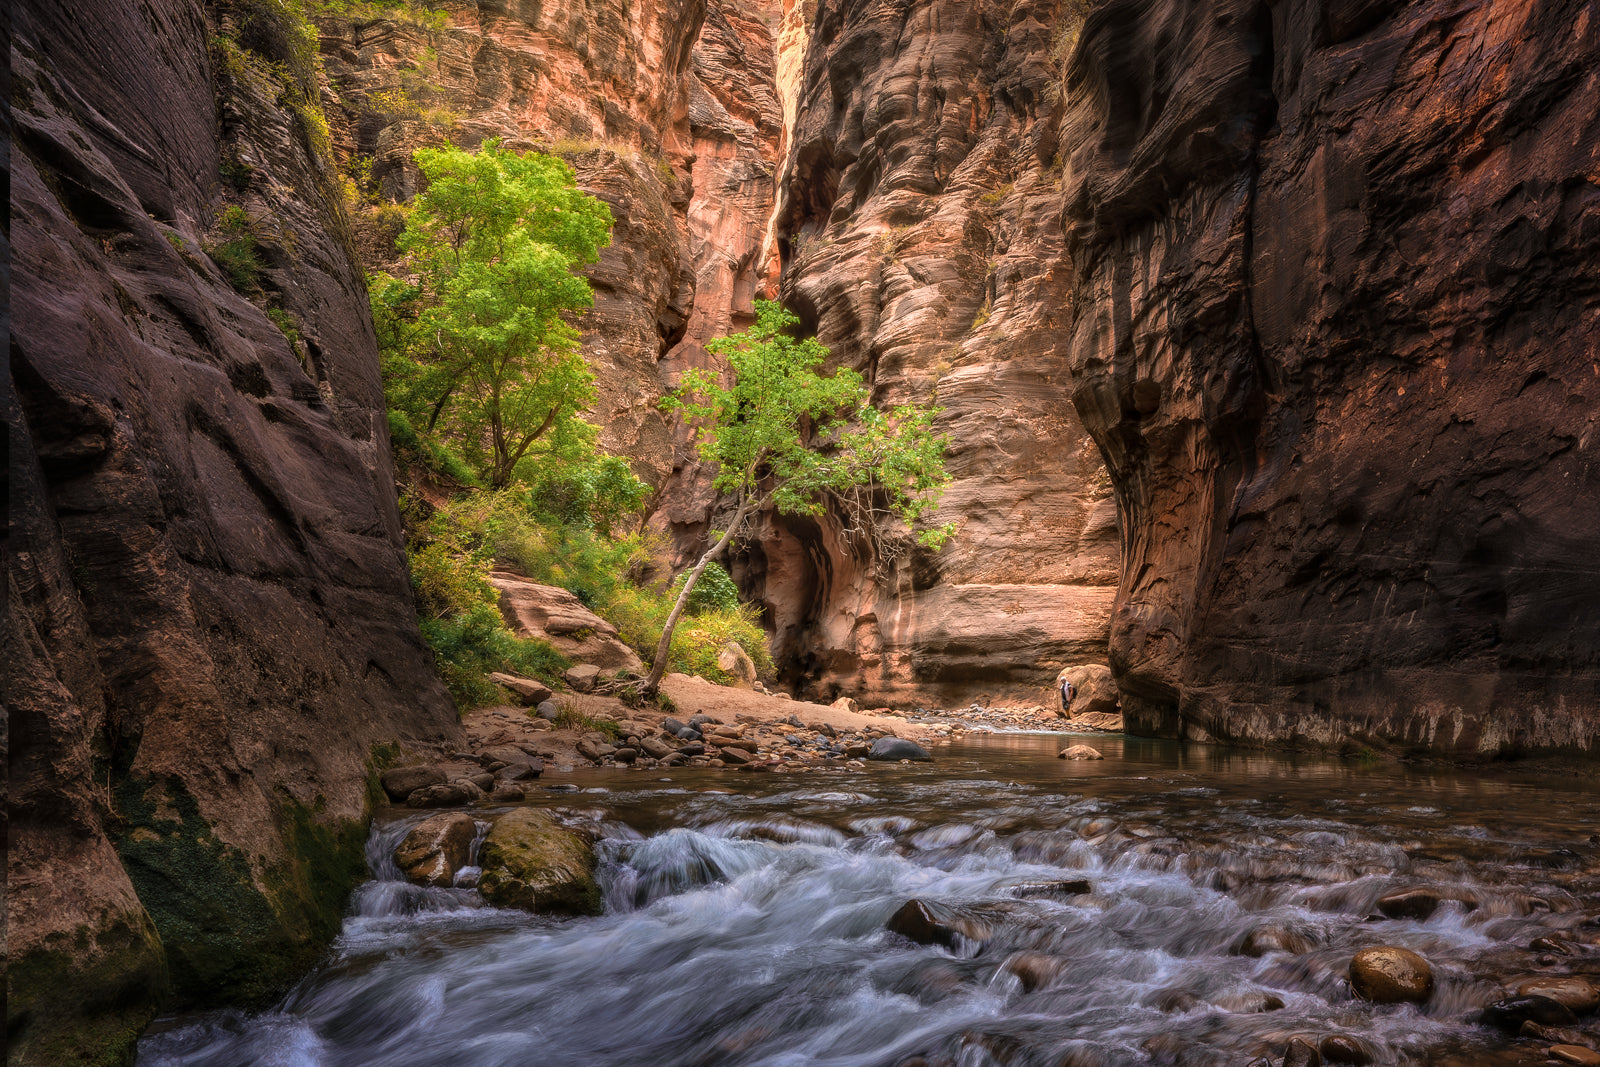 "Into The Narrows"  Zion National Park, UT